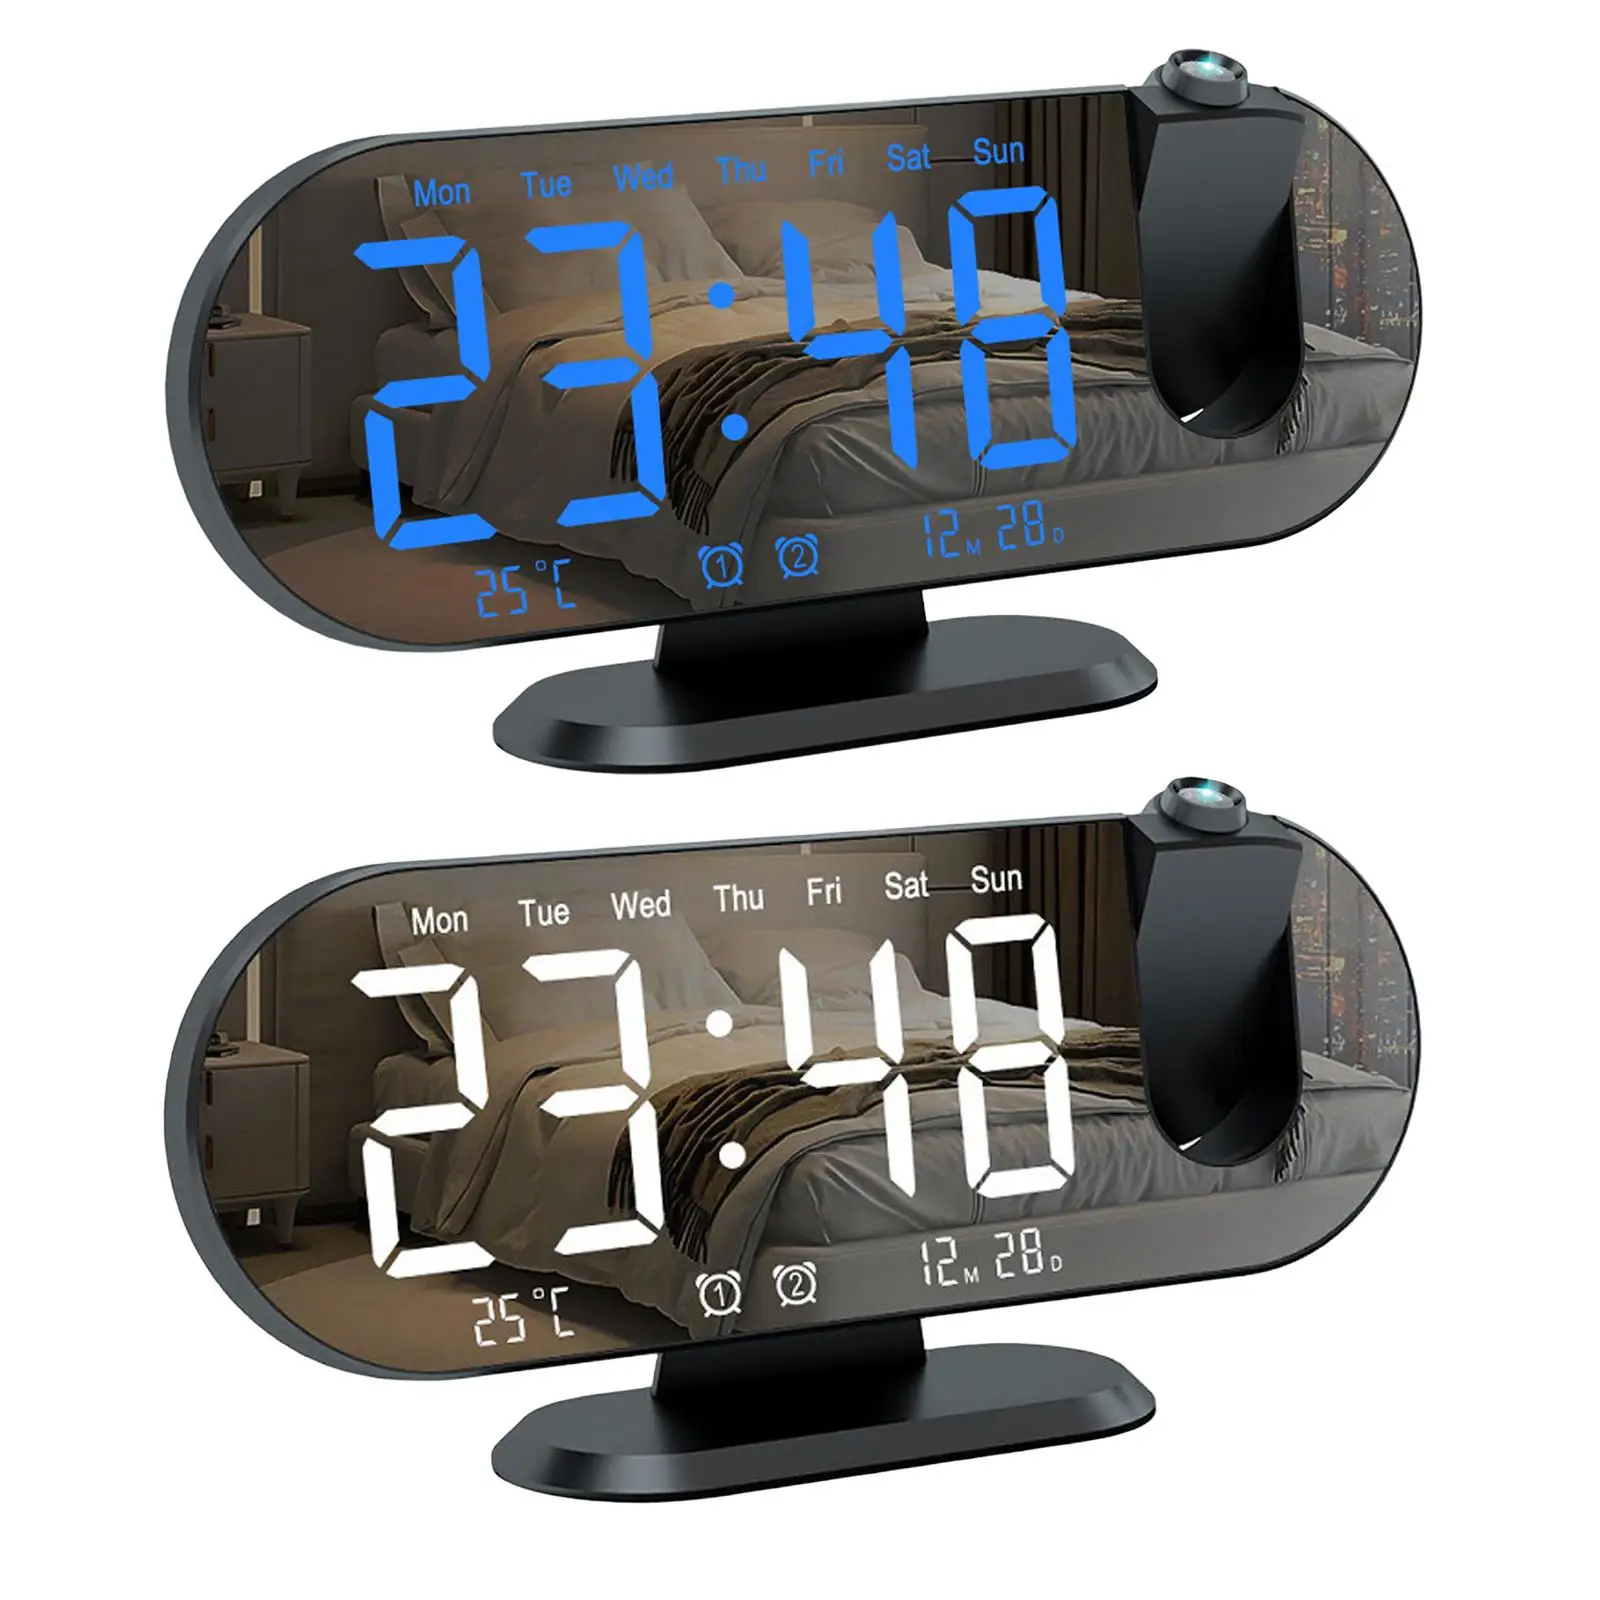 LED Digital Projection Alarm Clock 180 Rotatable for Dining Room